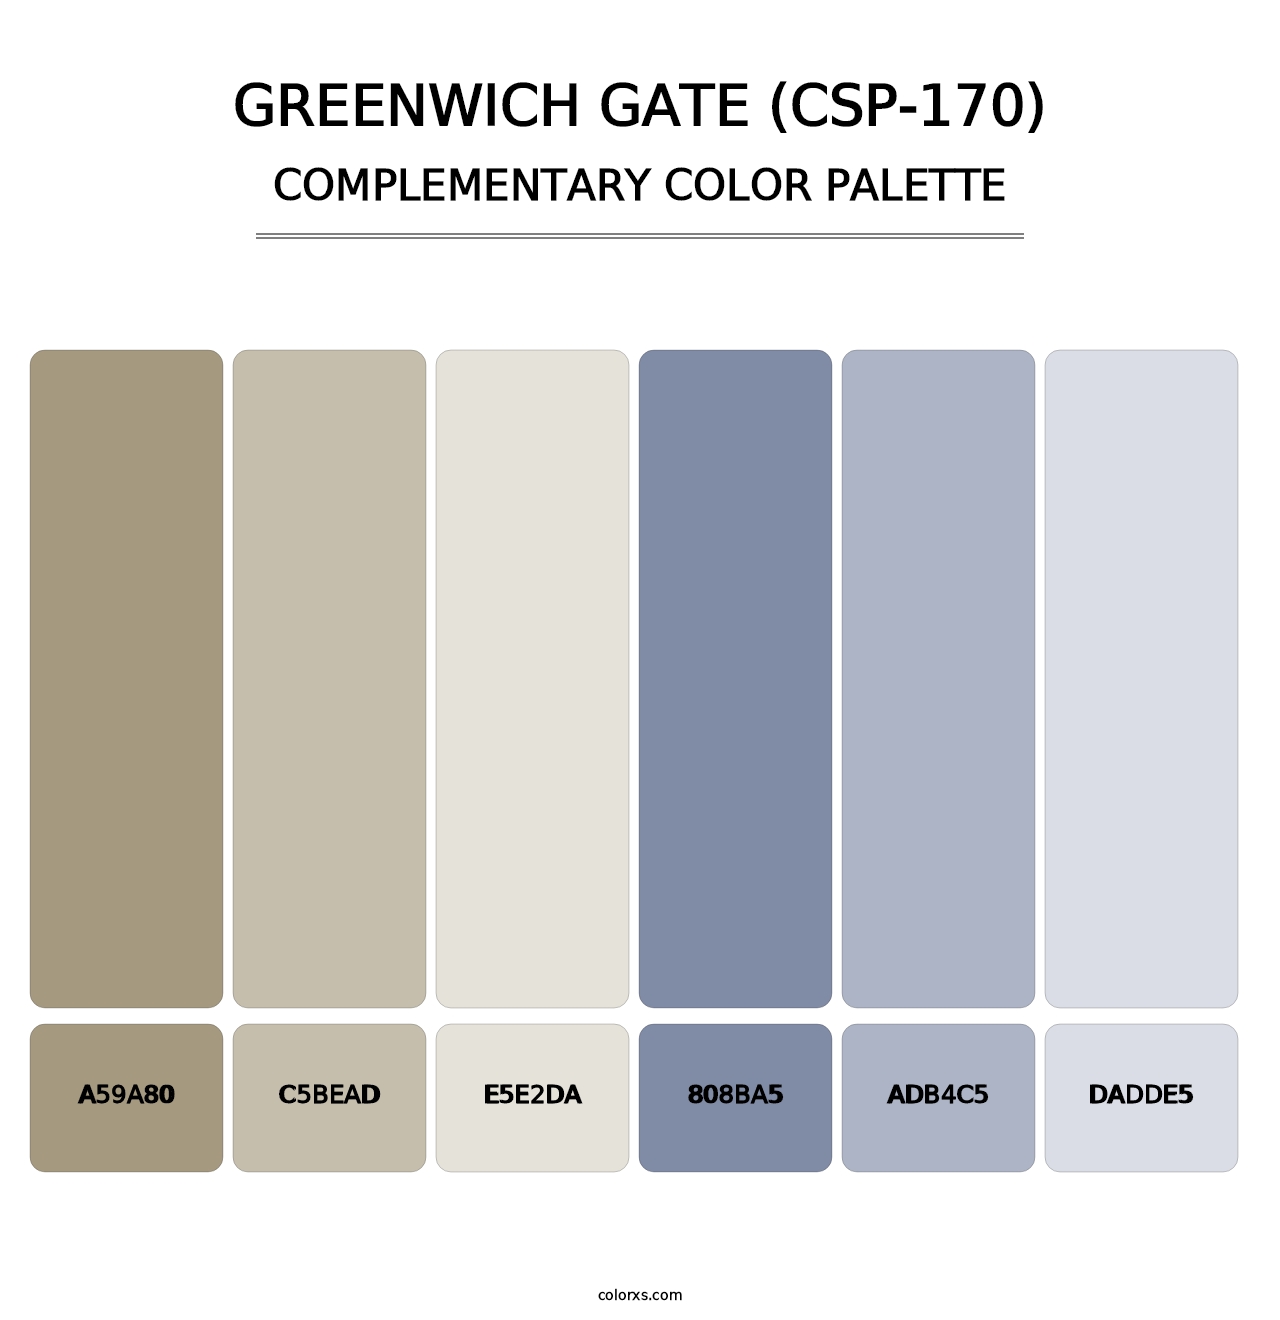 Greenwich Gate (CSP-170) - Complementary Color Palette